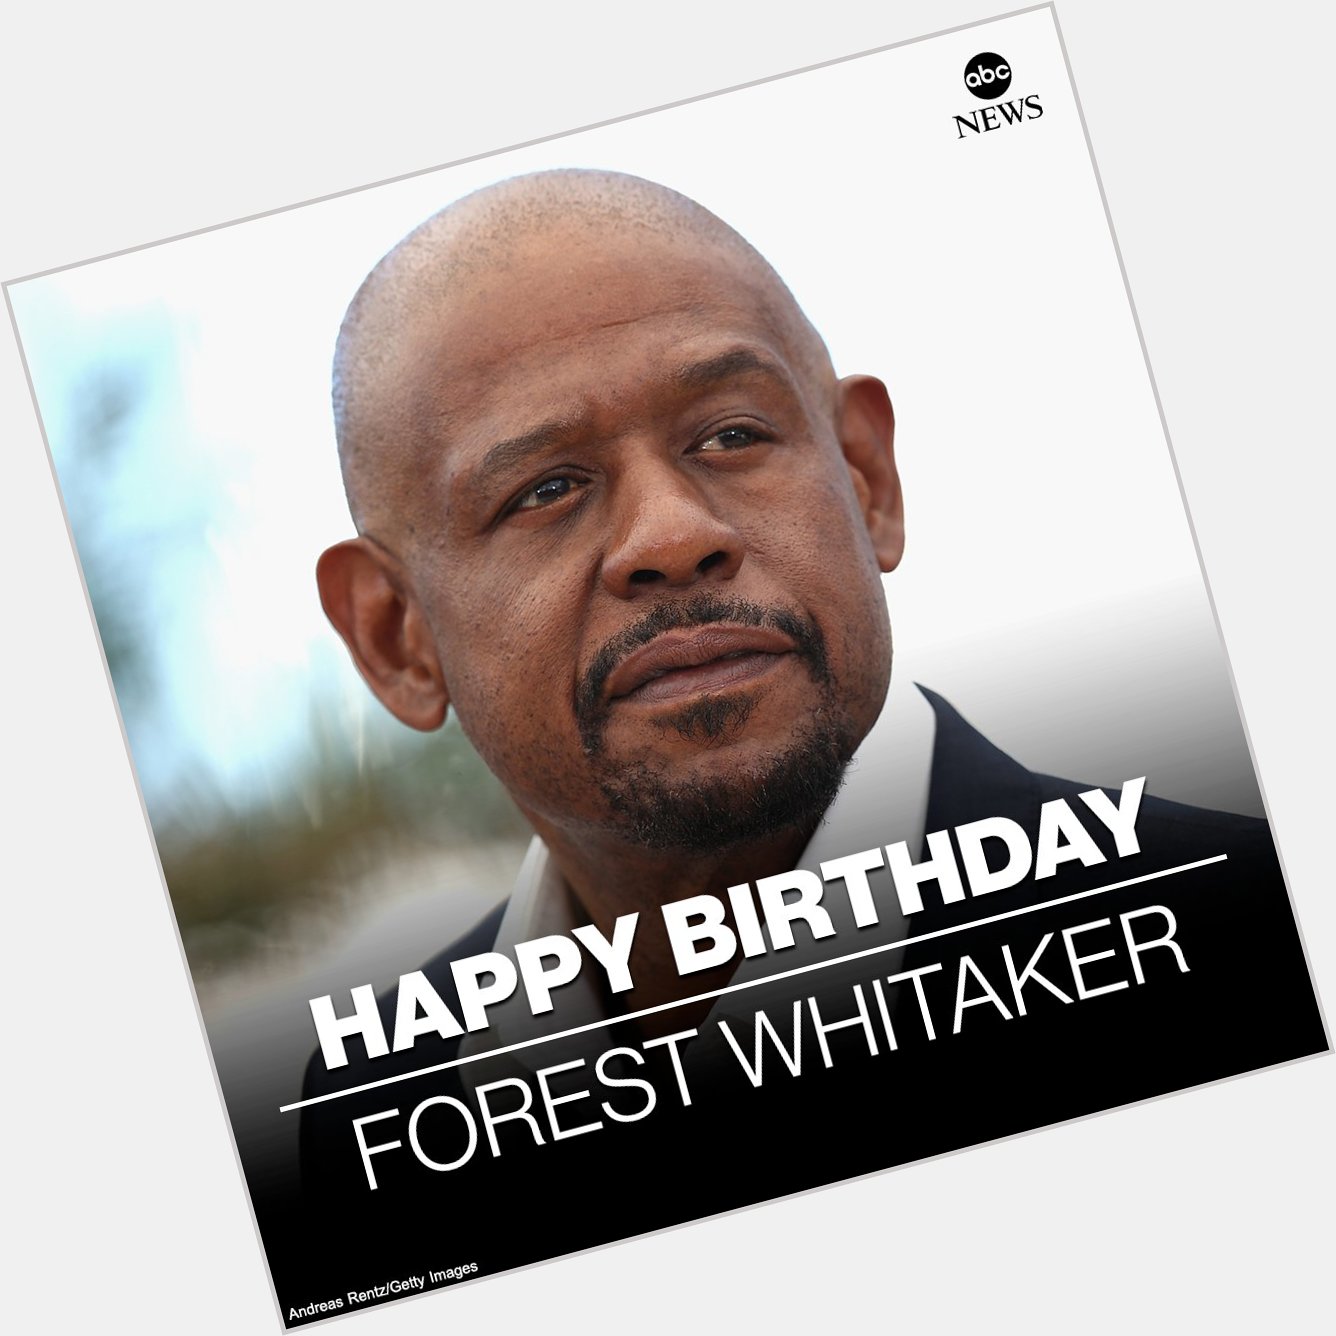 HAPPY BIRTHDAY: Actor-director Forest Whitaker is 60 today.  